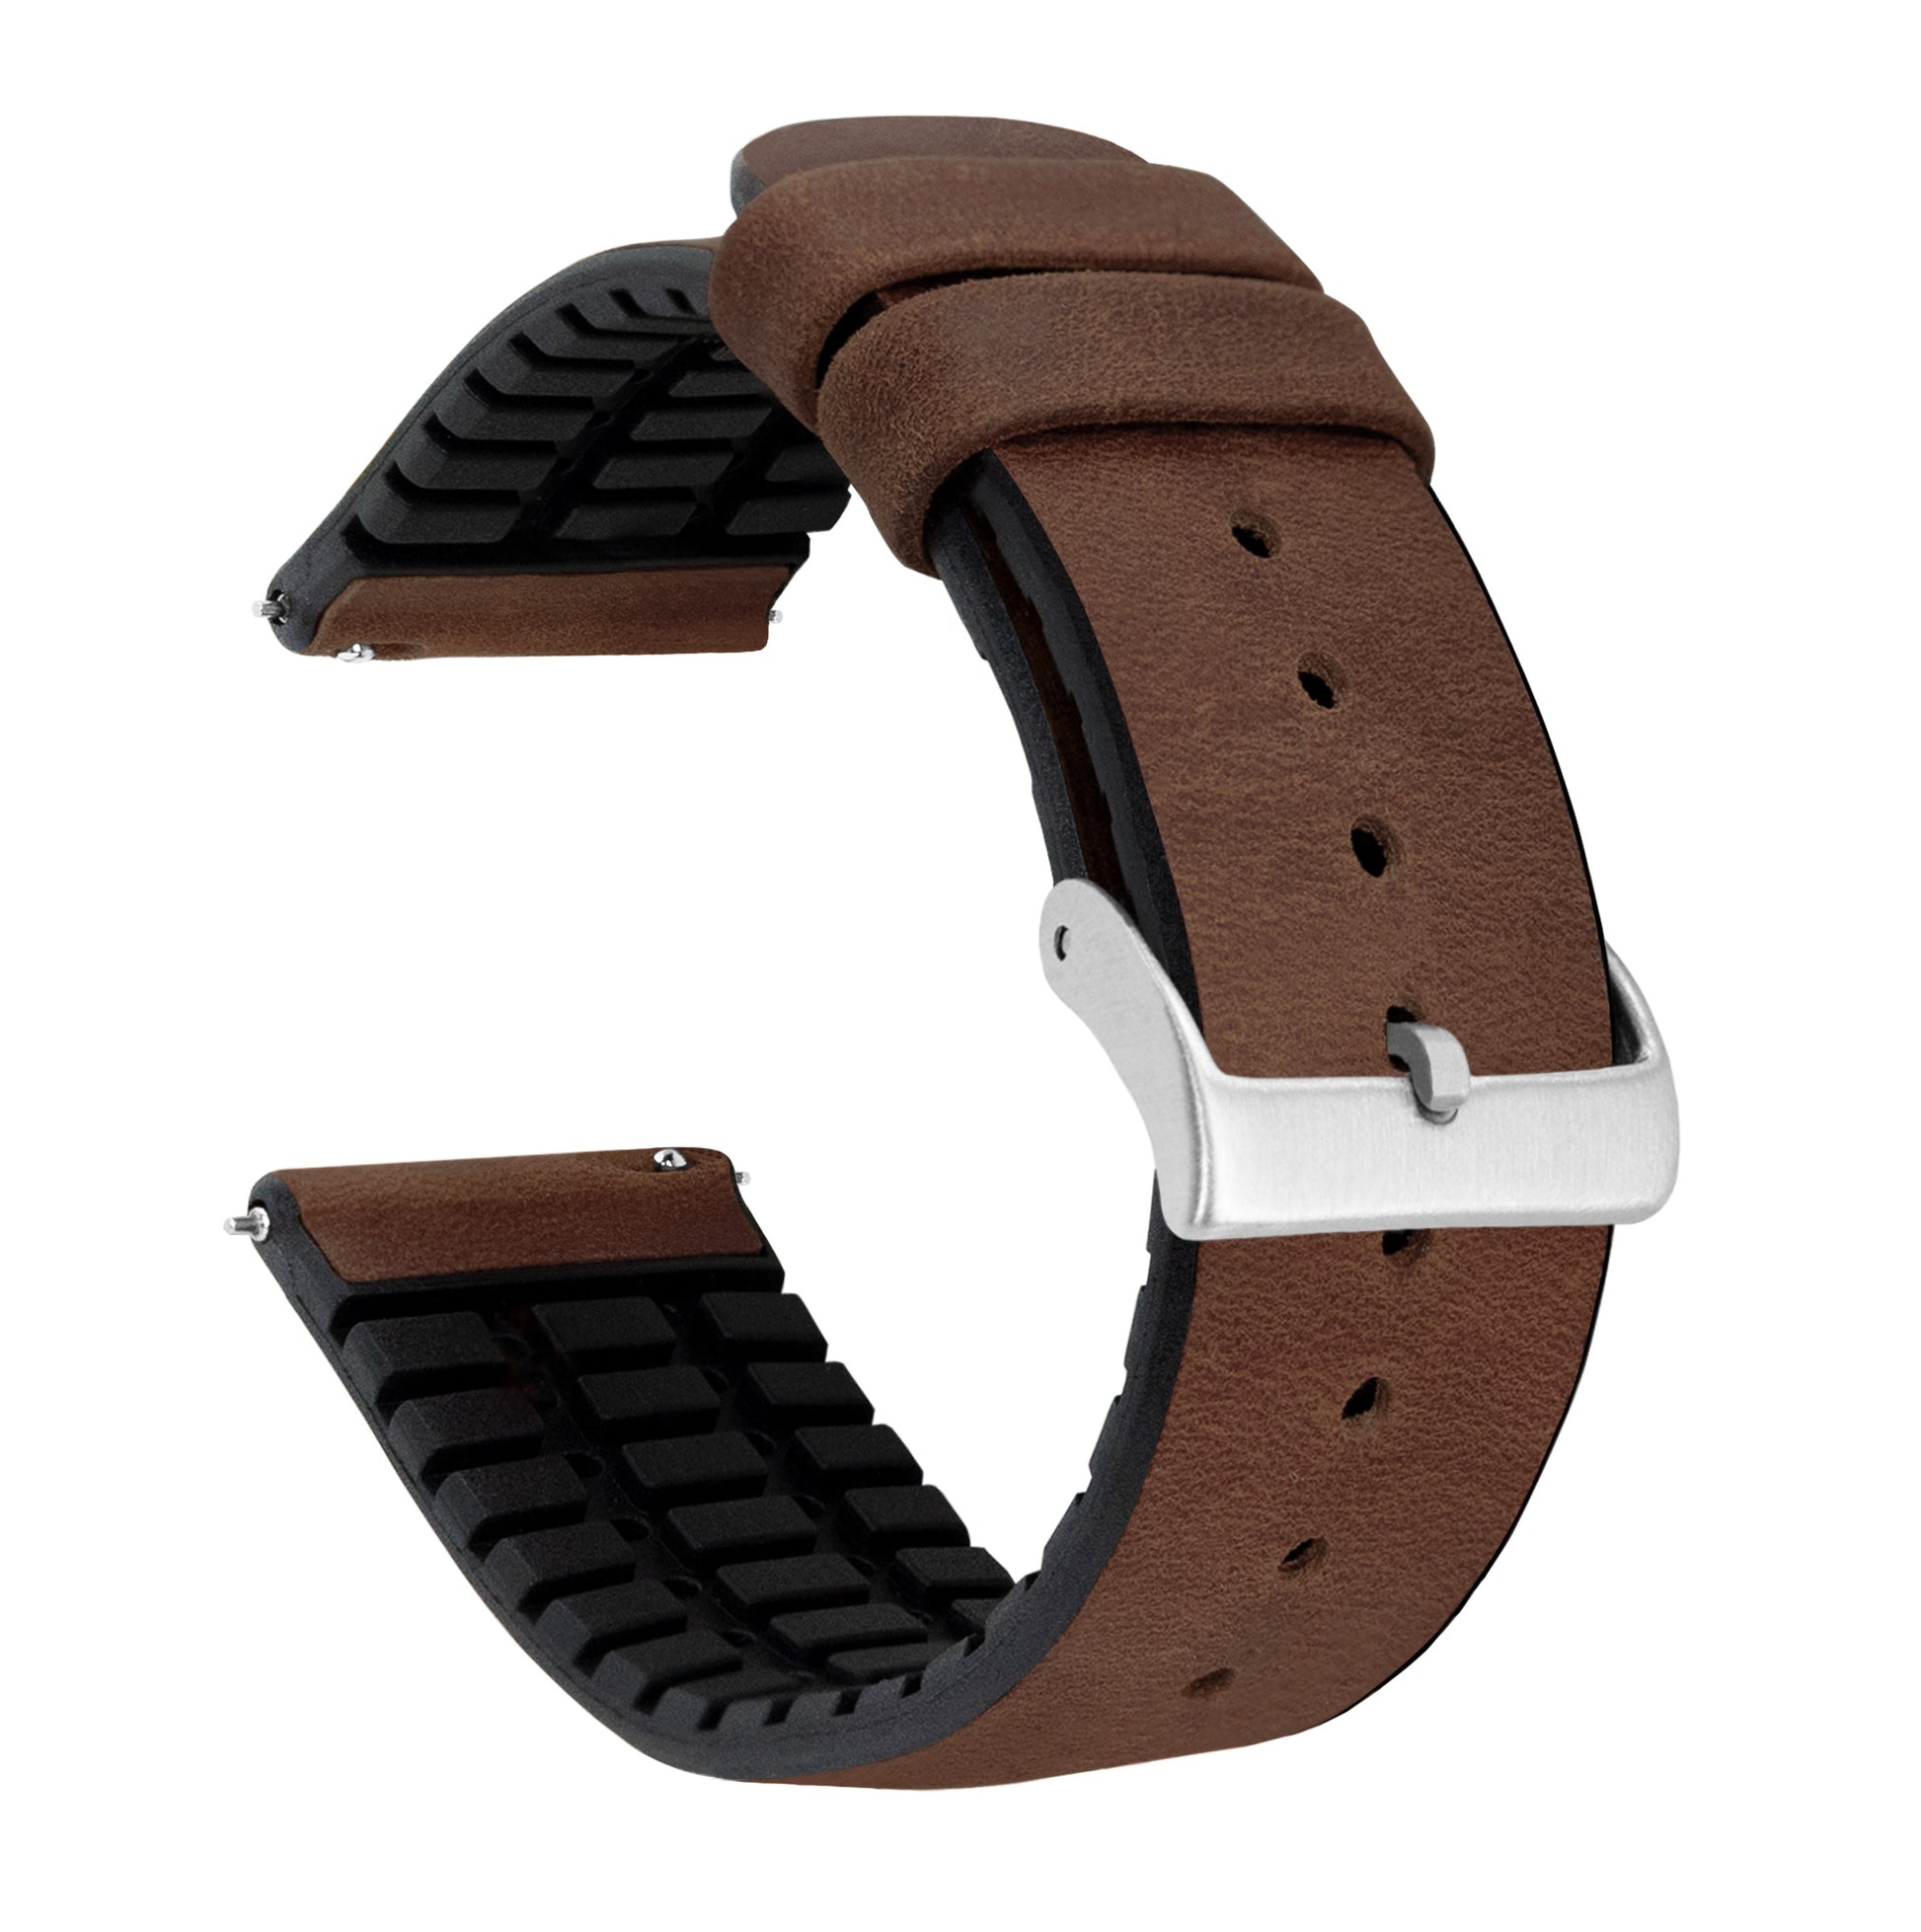 Amazfit Bip | Leather and Rubber Hybrid | Walnut Brown - Barton Watch Bands